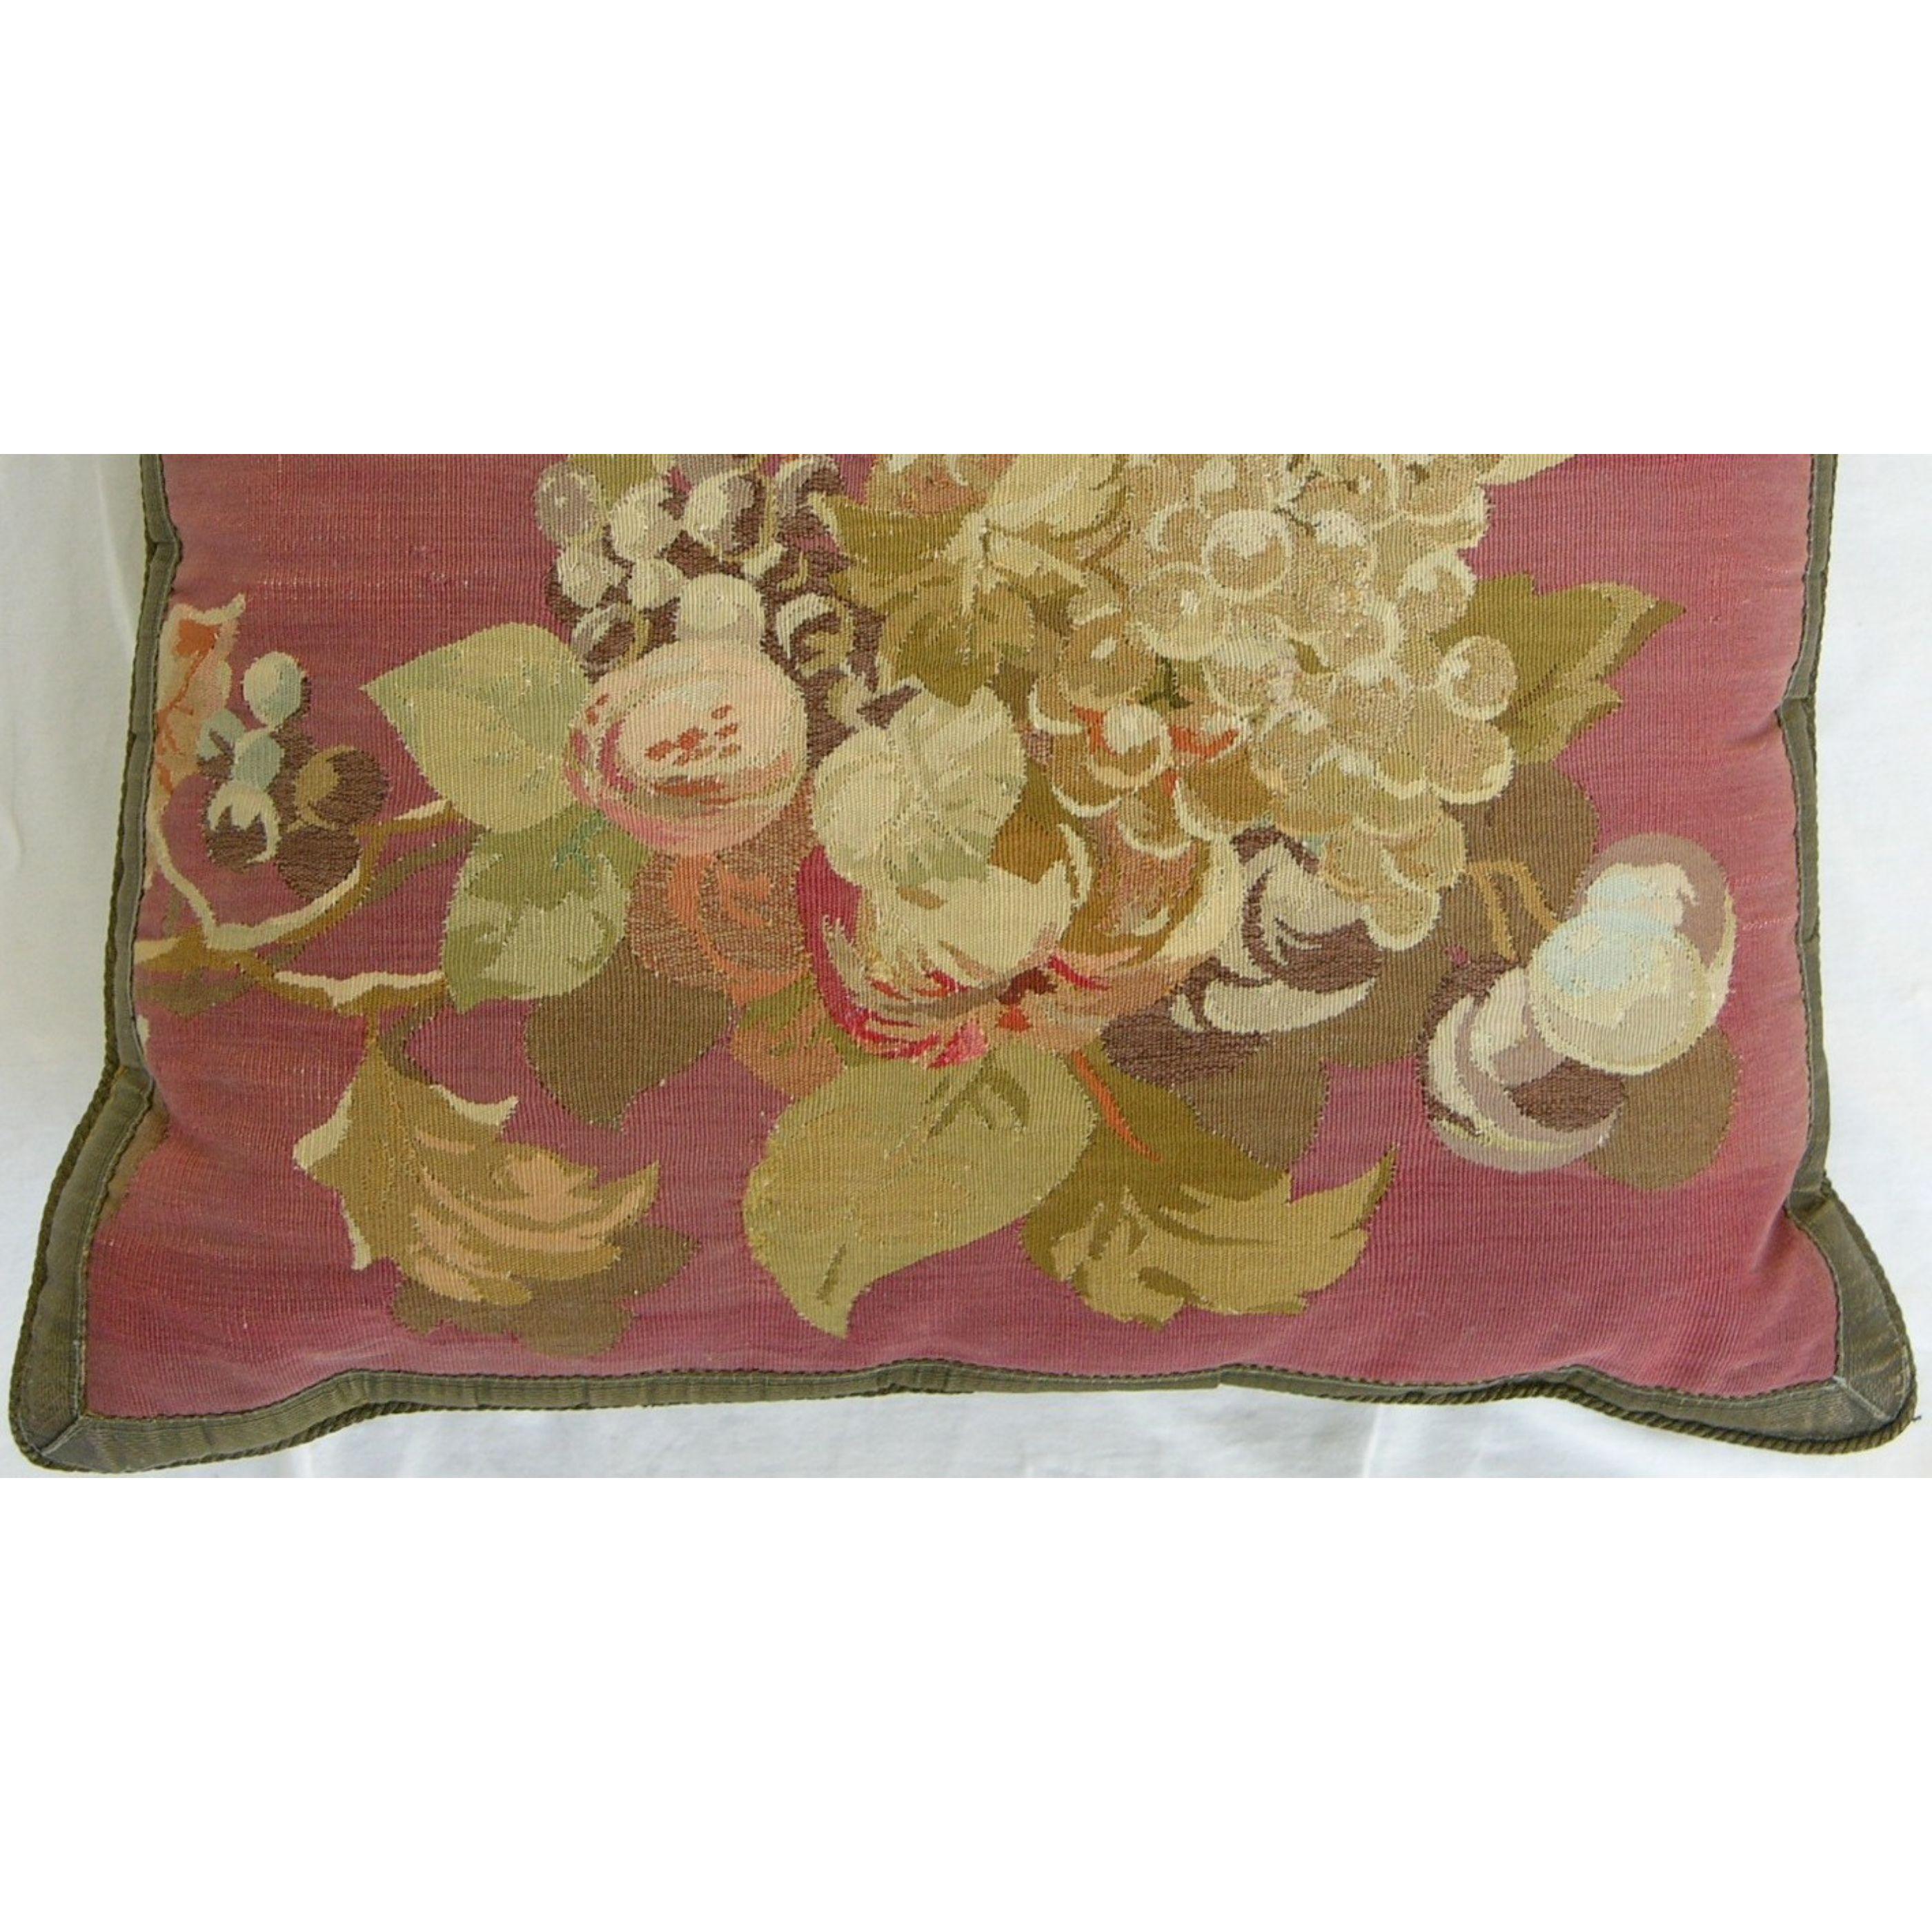 Circa 18th Century Antique French Aubusson Tapestry Pillow In Good Condition For Sale In Los Angeles, US